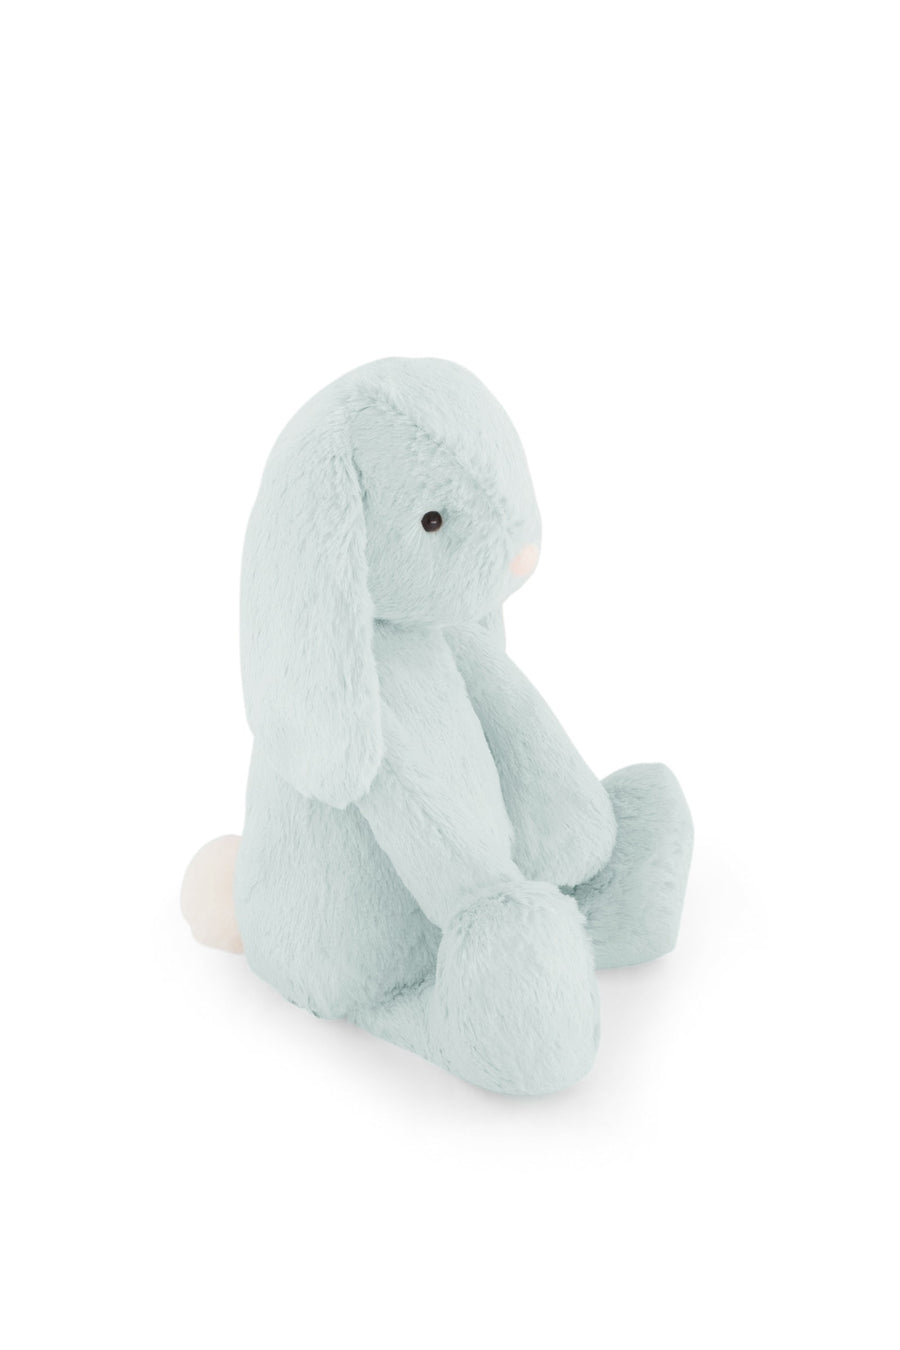 Snuggle Bunnies - Penelope the Bunny - Sky Childrens Toy from Jamie Kay NZ